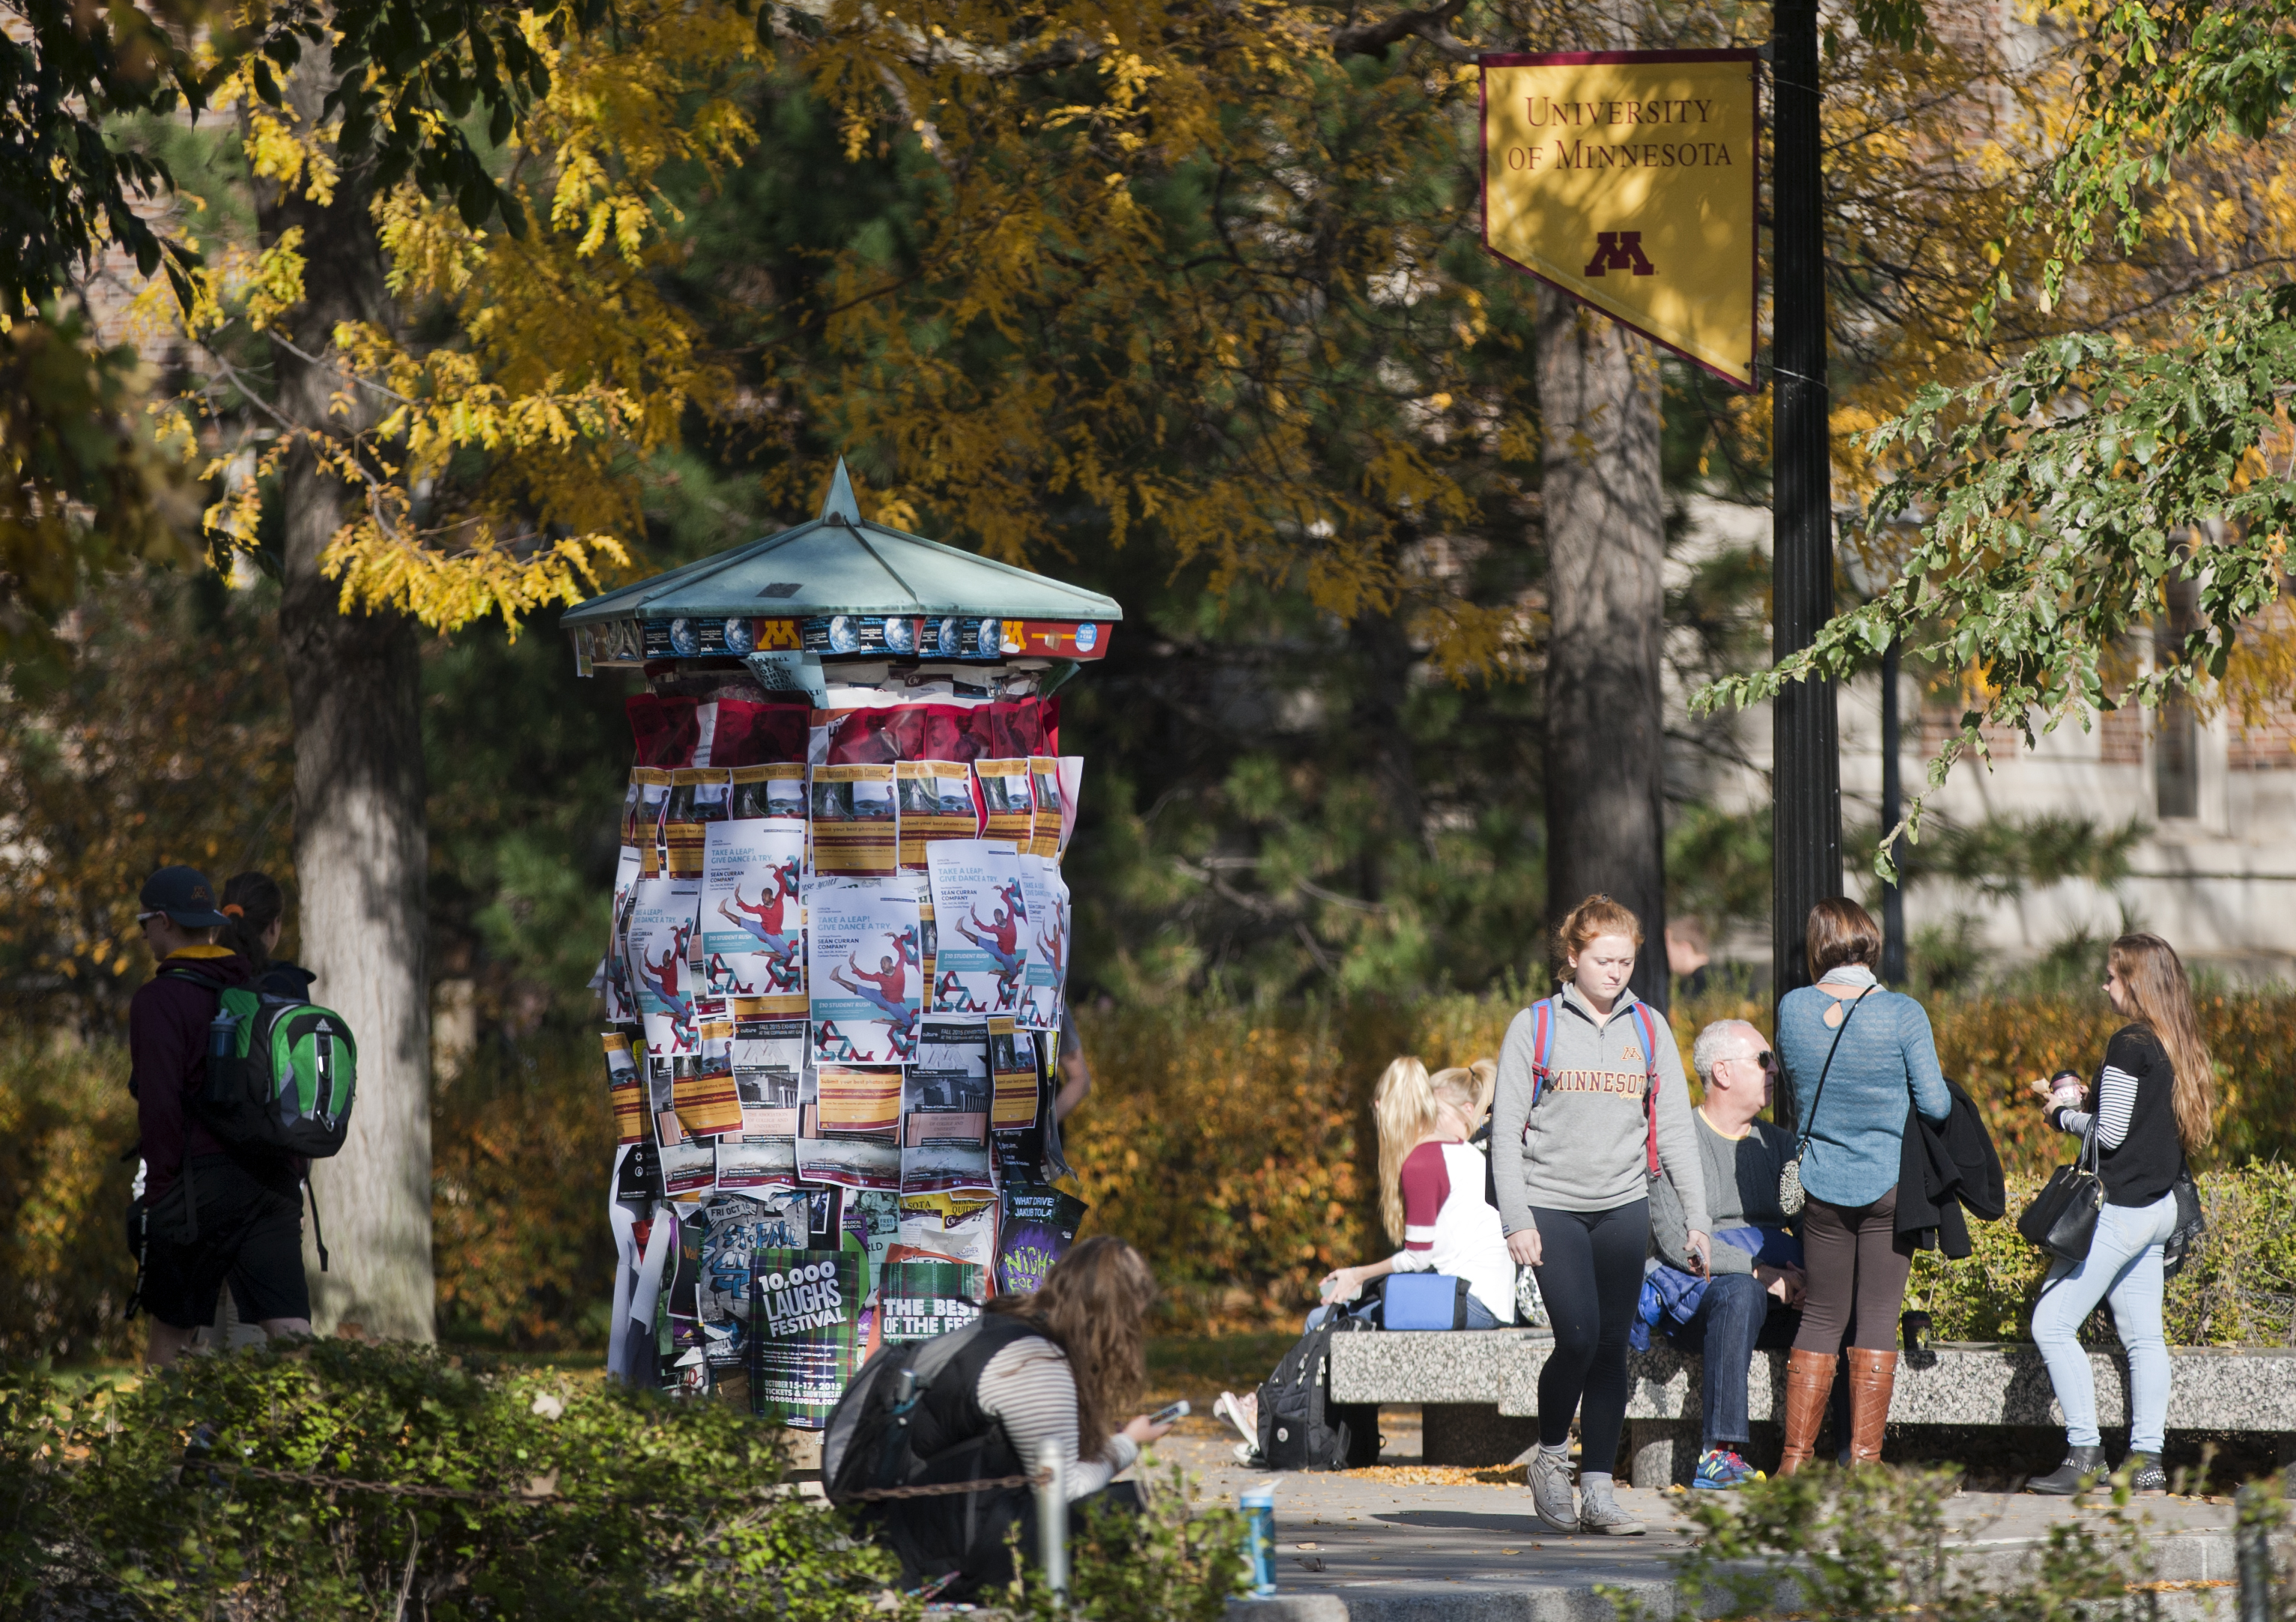 Students on the University of Minnesota's Minneapolis campus. House Photography file photo